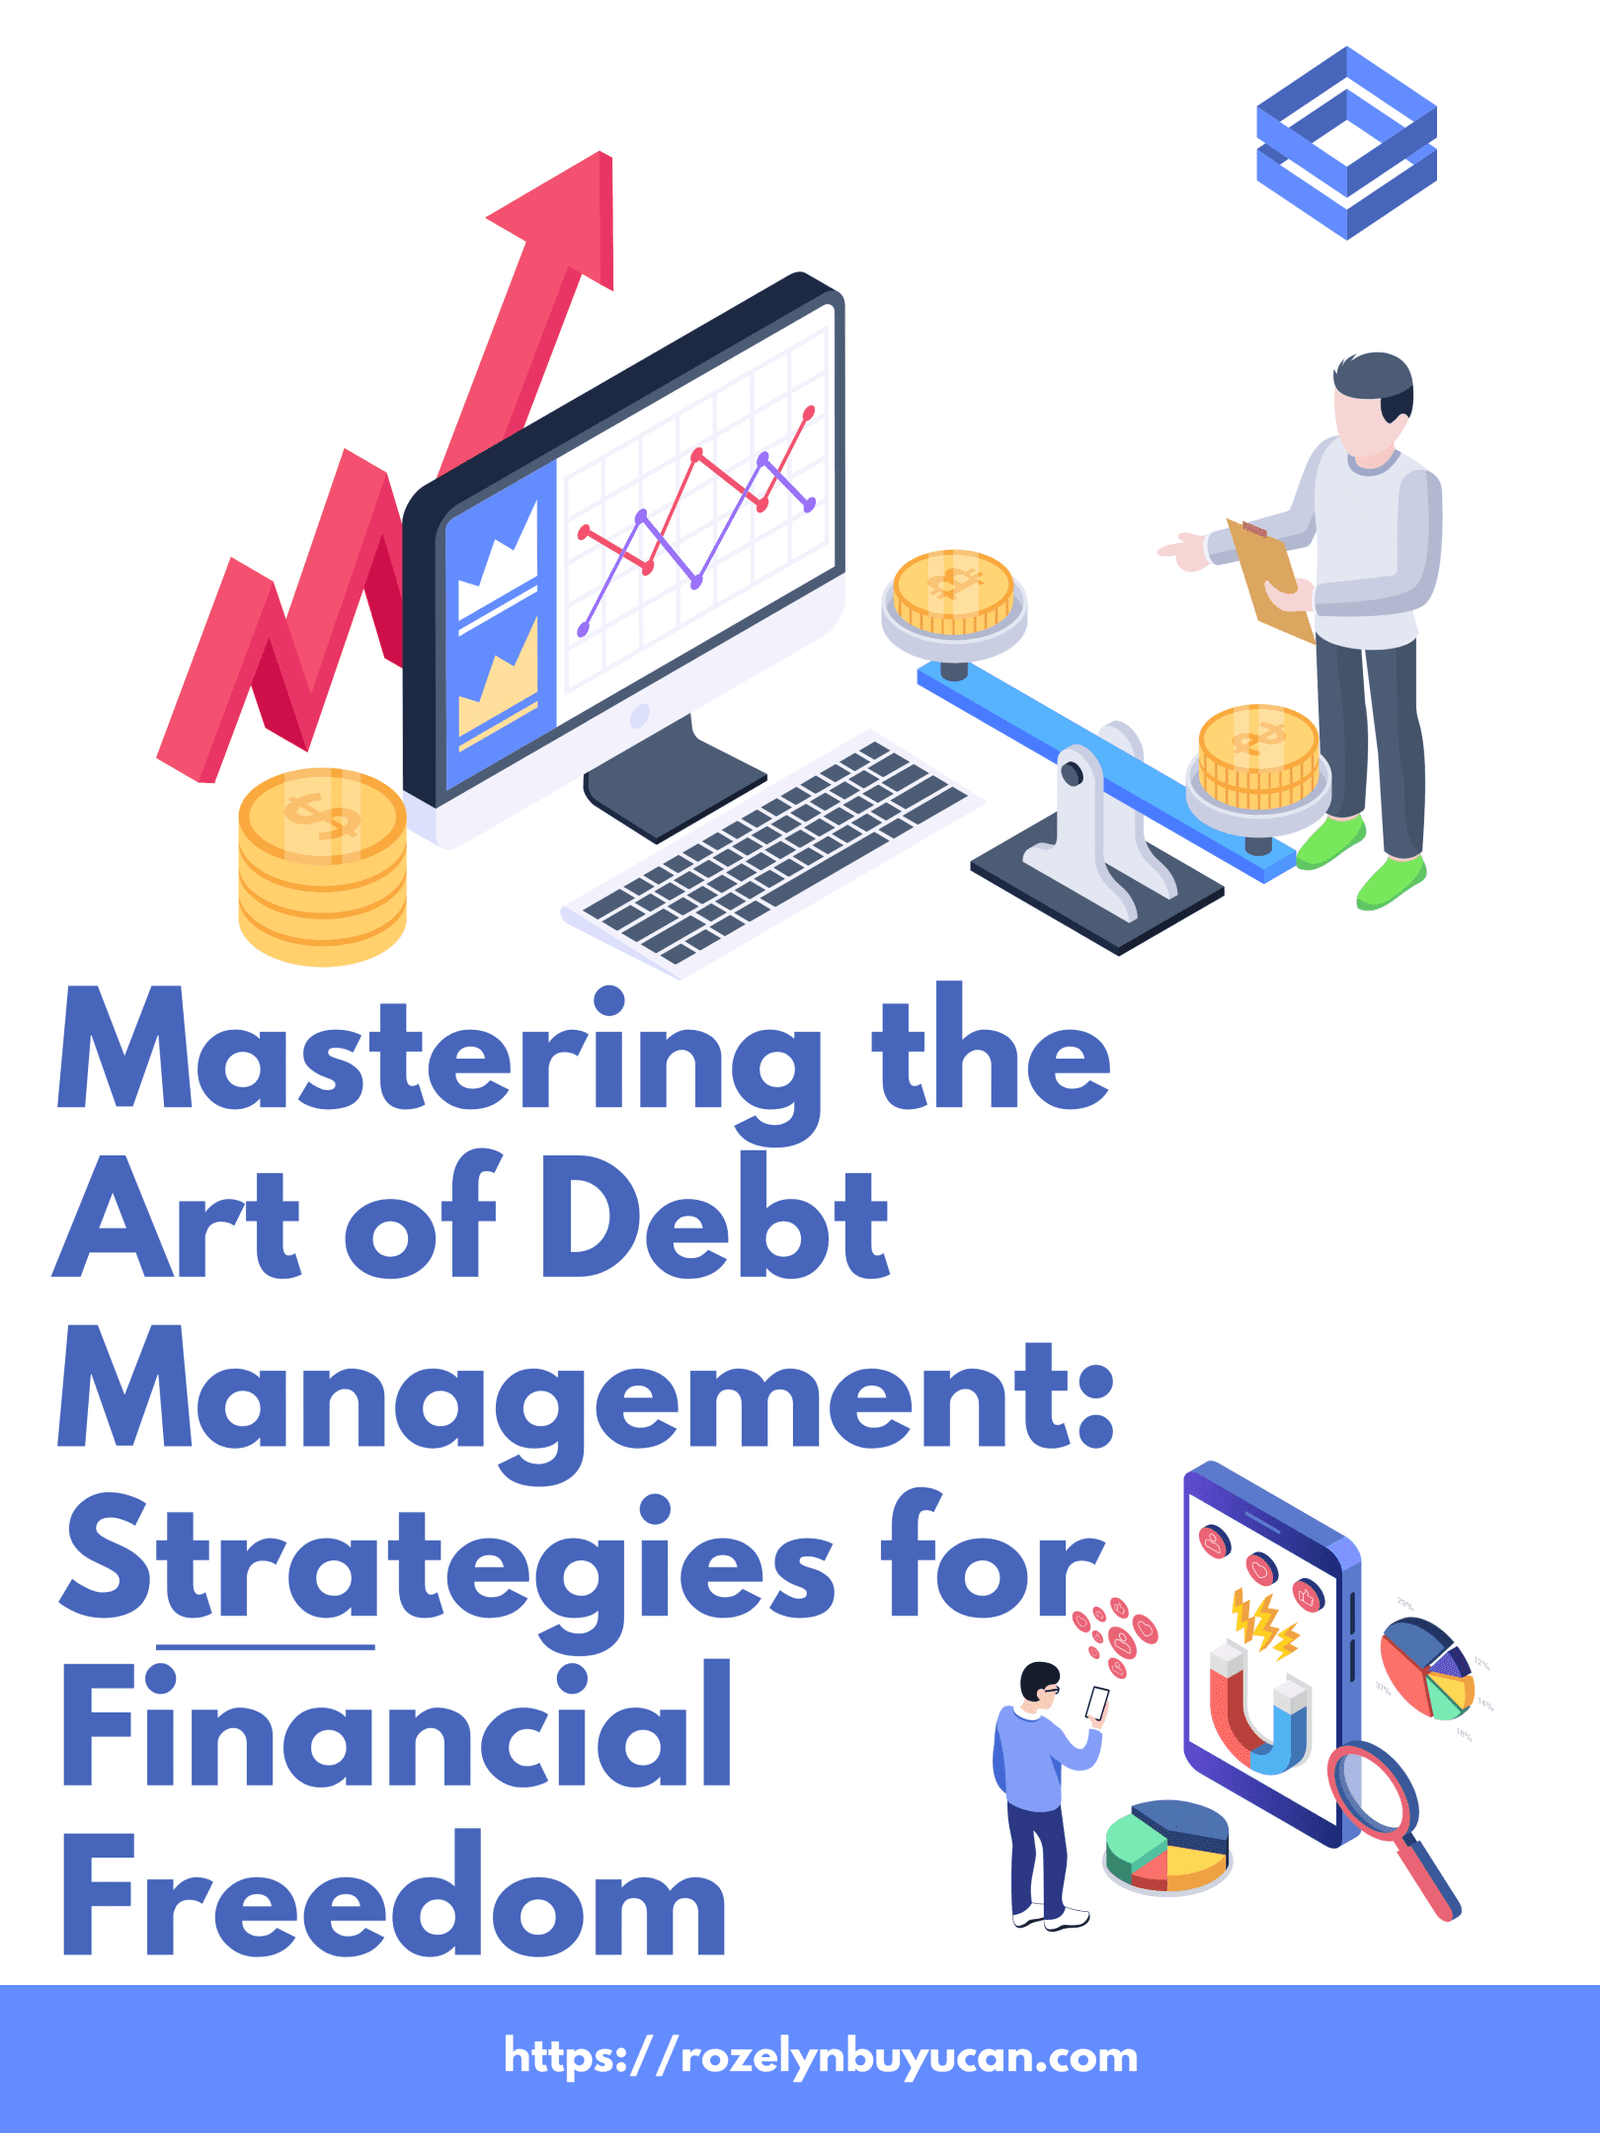 Mastering the Art of Debt Management: Strategies for Financial Freedom